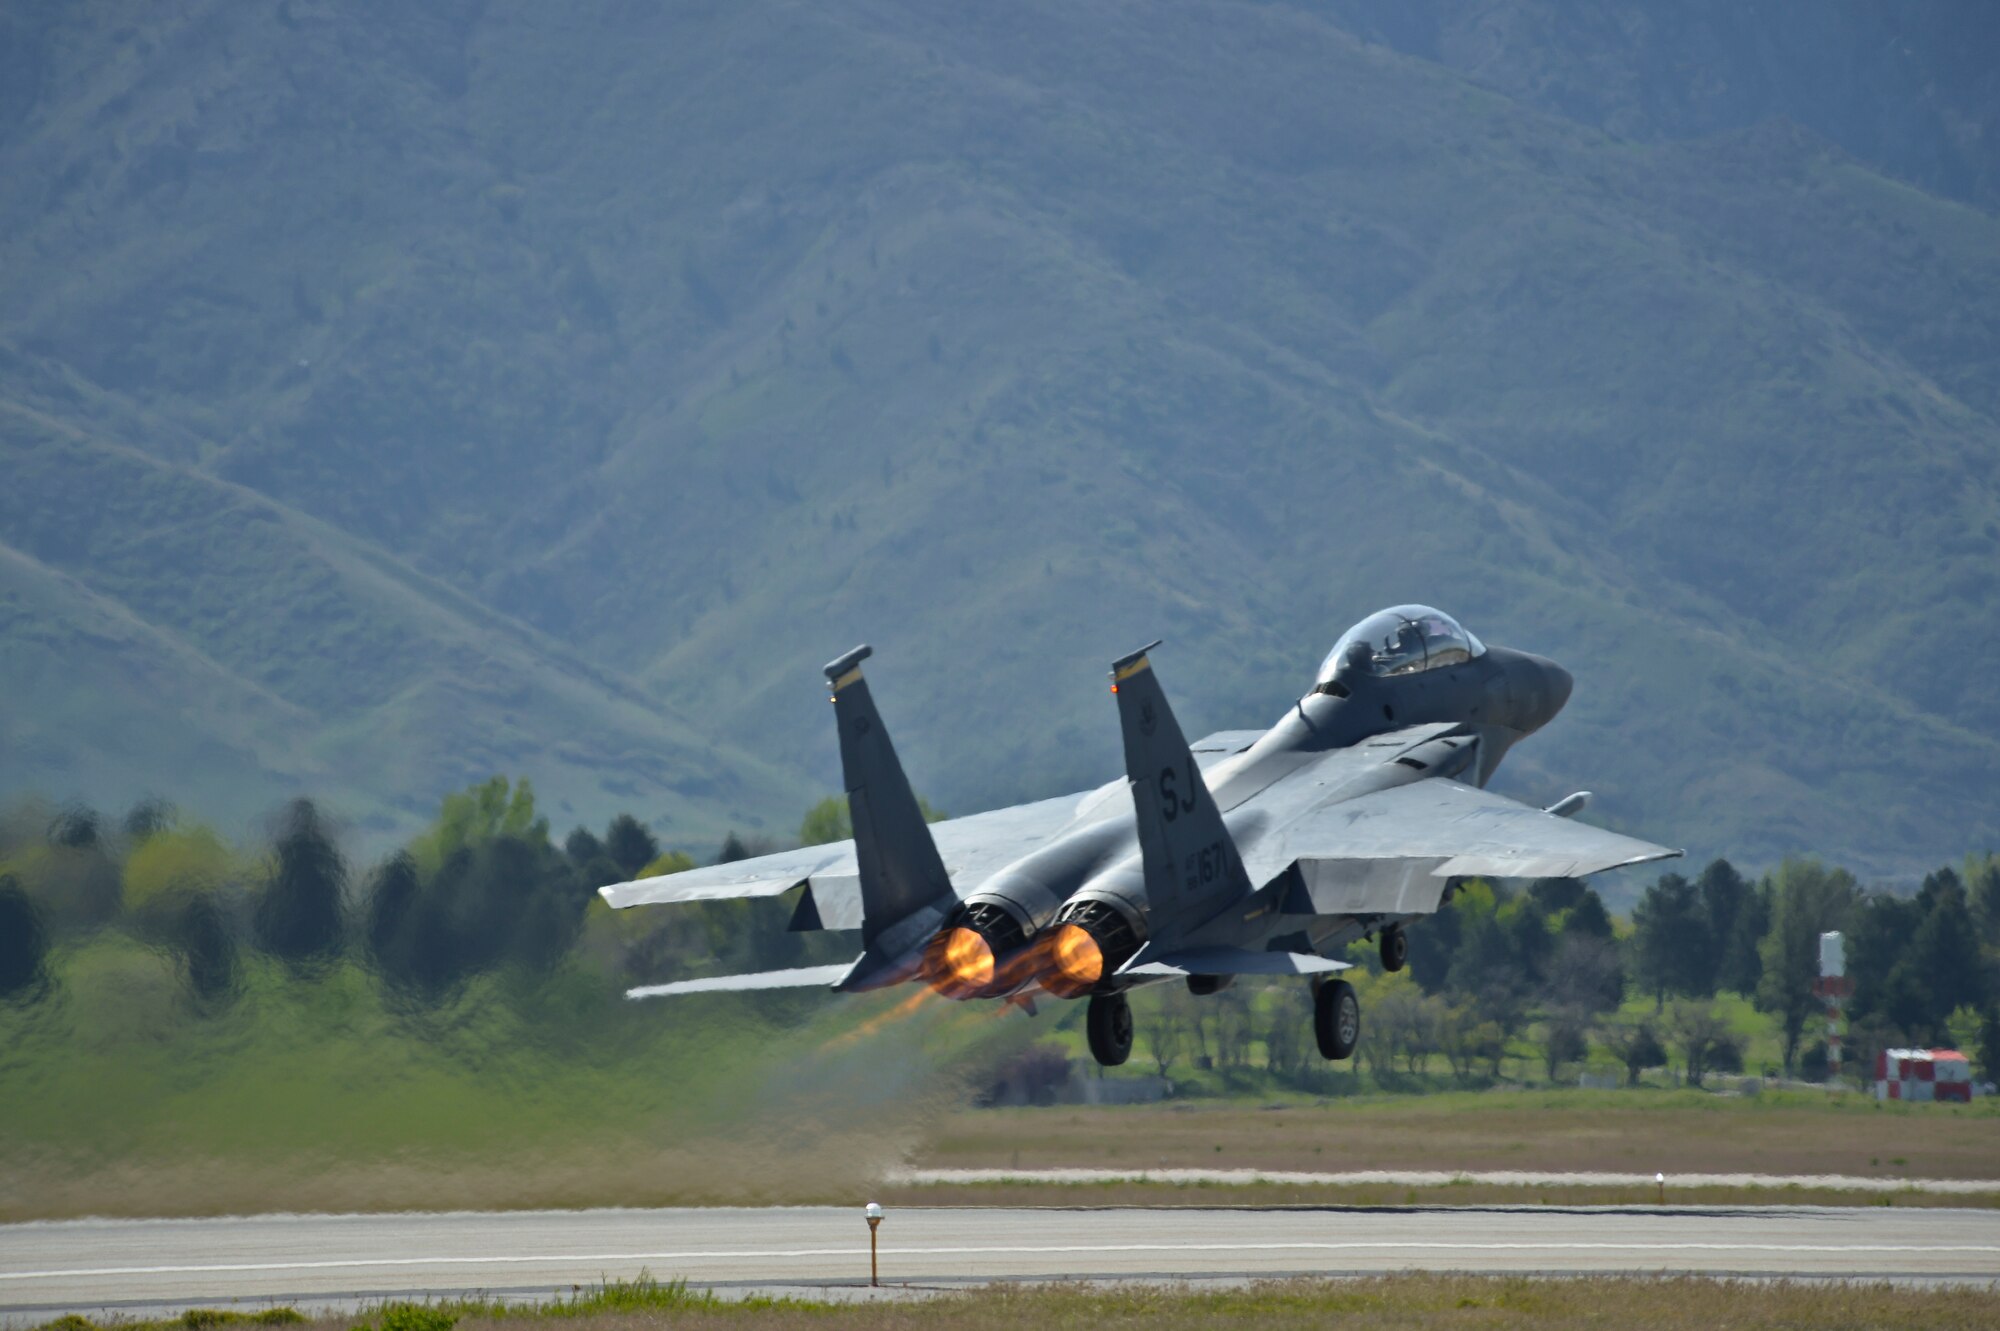 An F-15E Strike Eagle aircraft from Seymour Johnson Air Force Base, North Carolina, takes off, May 4, 2016, at Hill AFB, Utah. The 86th Fighter Weapons Squadron, a Hill AFB tenant unit, is conducting the U.S. Air Force air-to-ground weapons evaluation known as Combat Hammer to test and validate the performance of crews, pilots and their technology while deploying precision-guided munitions. (U.S. Air Force photo by Paul Holcomb)